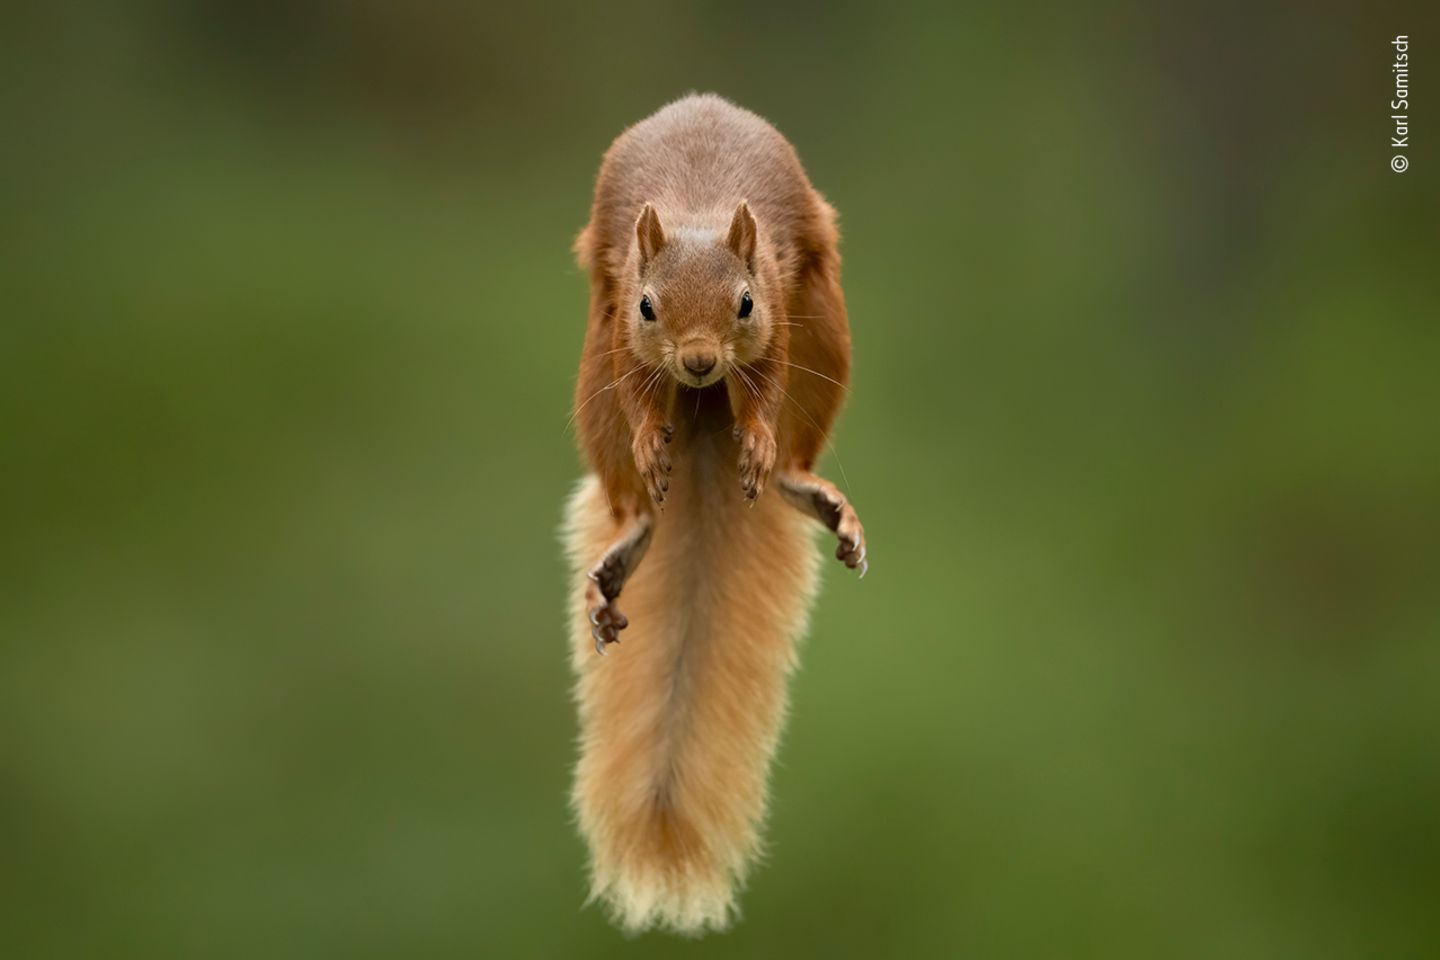 The jump by Karl Samitsch, Austria Karl was in the Cairngorms, Scotland, with a friend who took him to a forest where red squirrels were used to being fed. They placed hazelnuts on opposite branches of two trees and Karl then positioned his camera on a tripod between the branches facing the direction a squirrel might jump. Setting his camera to automatic focus, he waited in camouflage gear behind a tree, holding a remote control. After less than an hour, two squirrels appeared. As they leapt between the branches, he used the high-speed burst mode on his camera, and of the 150 frames, four were sharp, and this one perfectly captured the moment. Canon EOS-1D X Mark II + 200–400mm f4 lens + 1.4–560mm converter; 1/1600 sec at f5.6 (-0.3); ISO 3200; remote control cable; Gitzo tripod.